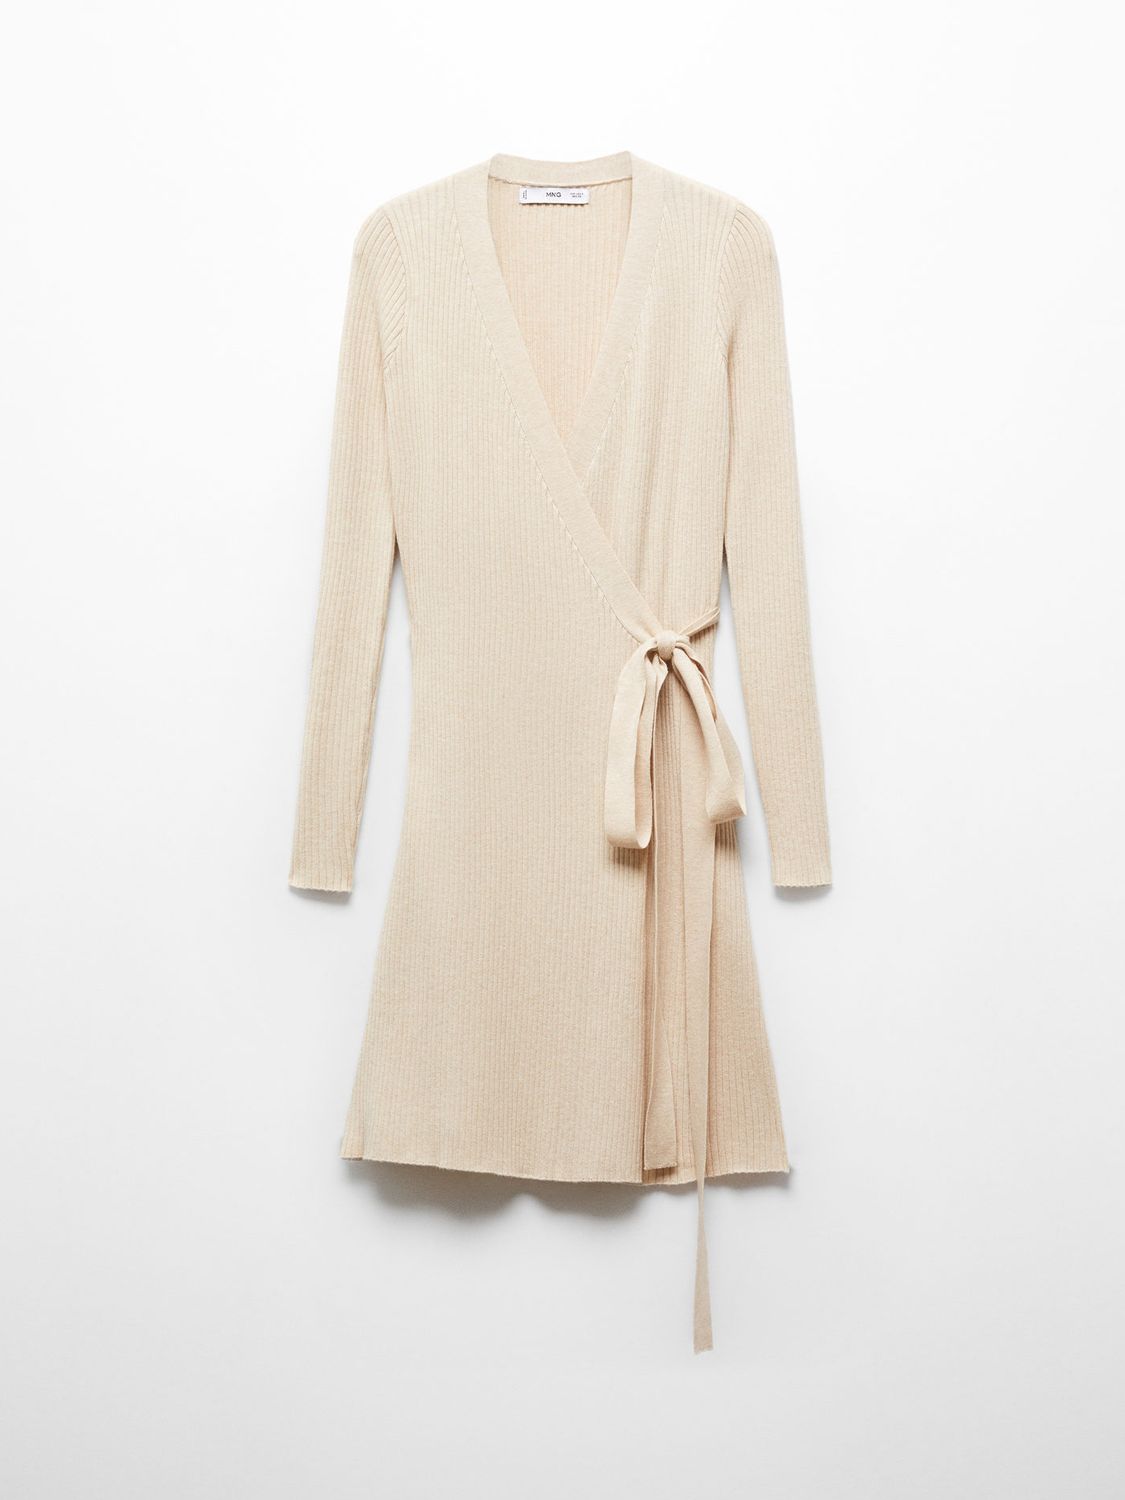 Buy Mango Flare Wrap Over Cable Knit Cardigan, Light Beige Online at johnlewis.com